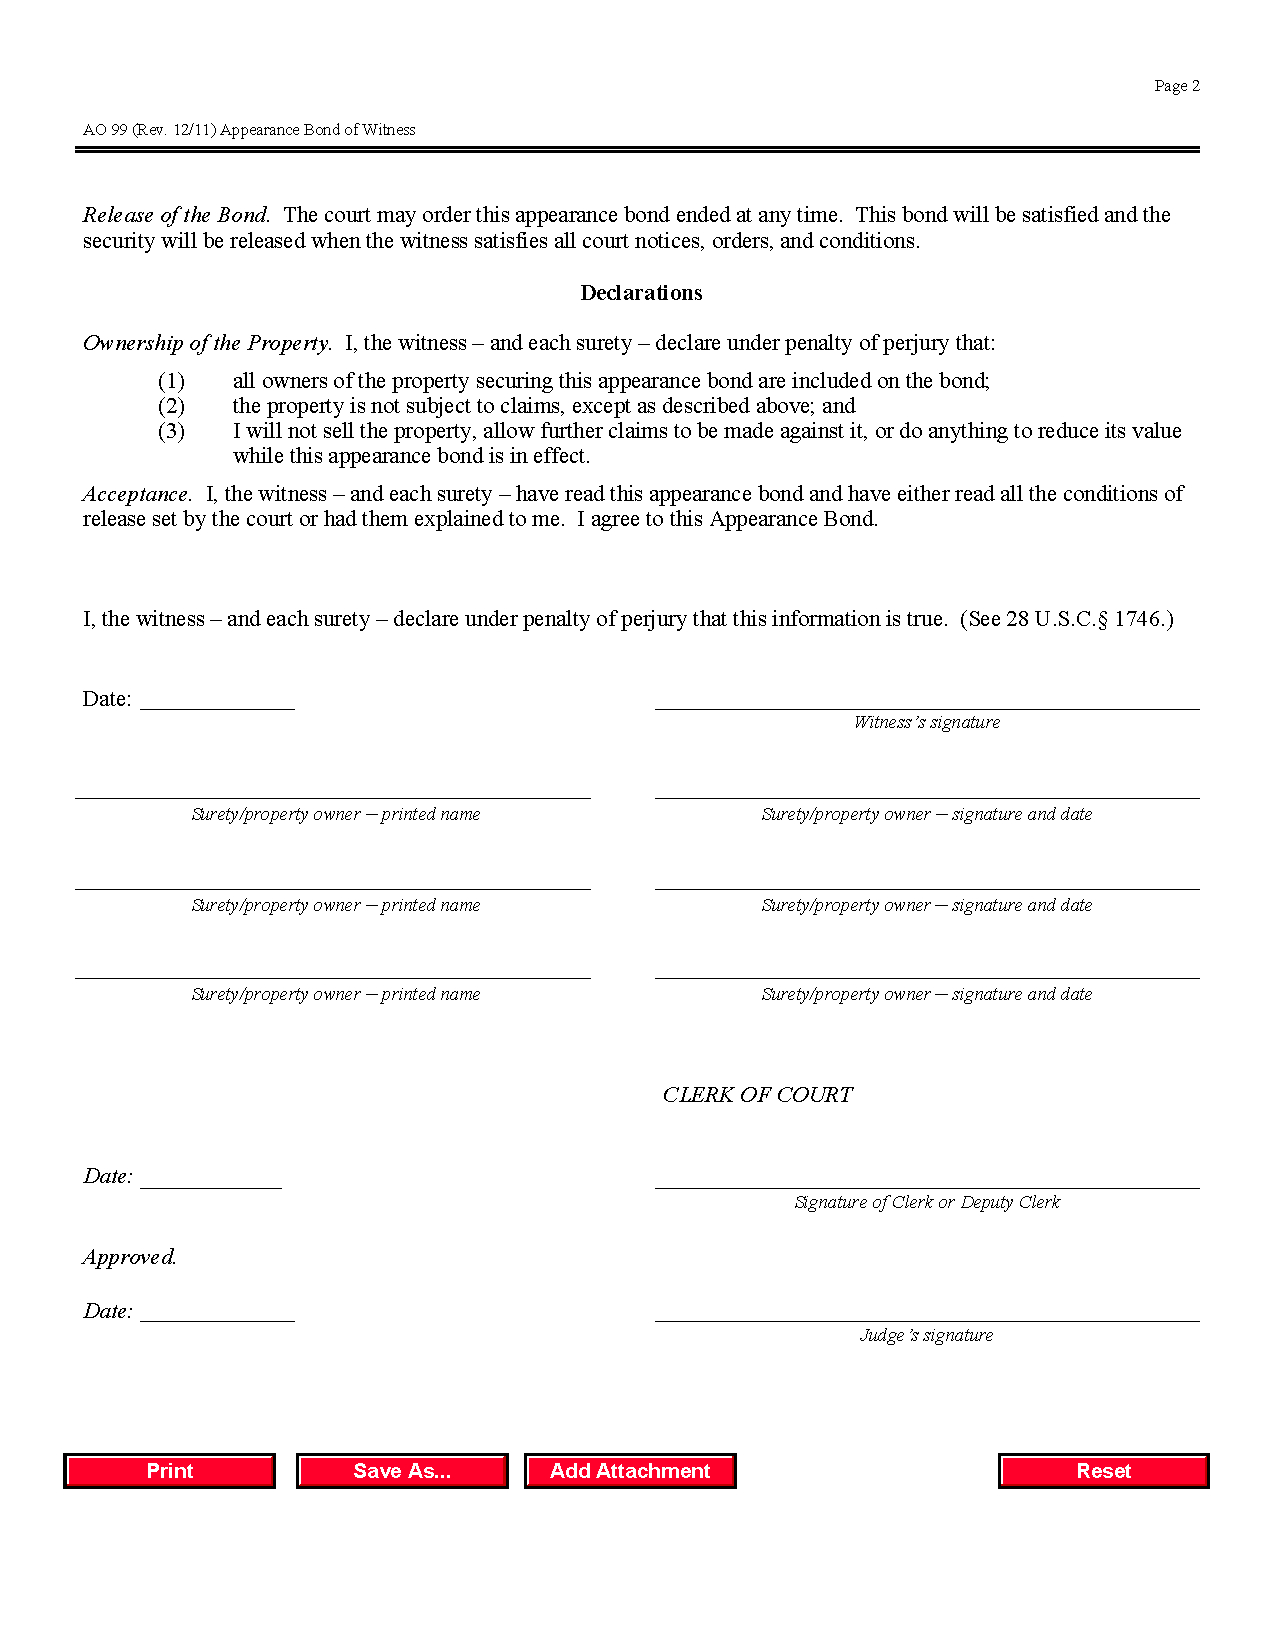 Form Ao 099 Appearance Bond Of Witness throughout Personal Appearance Contract Template